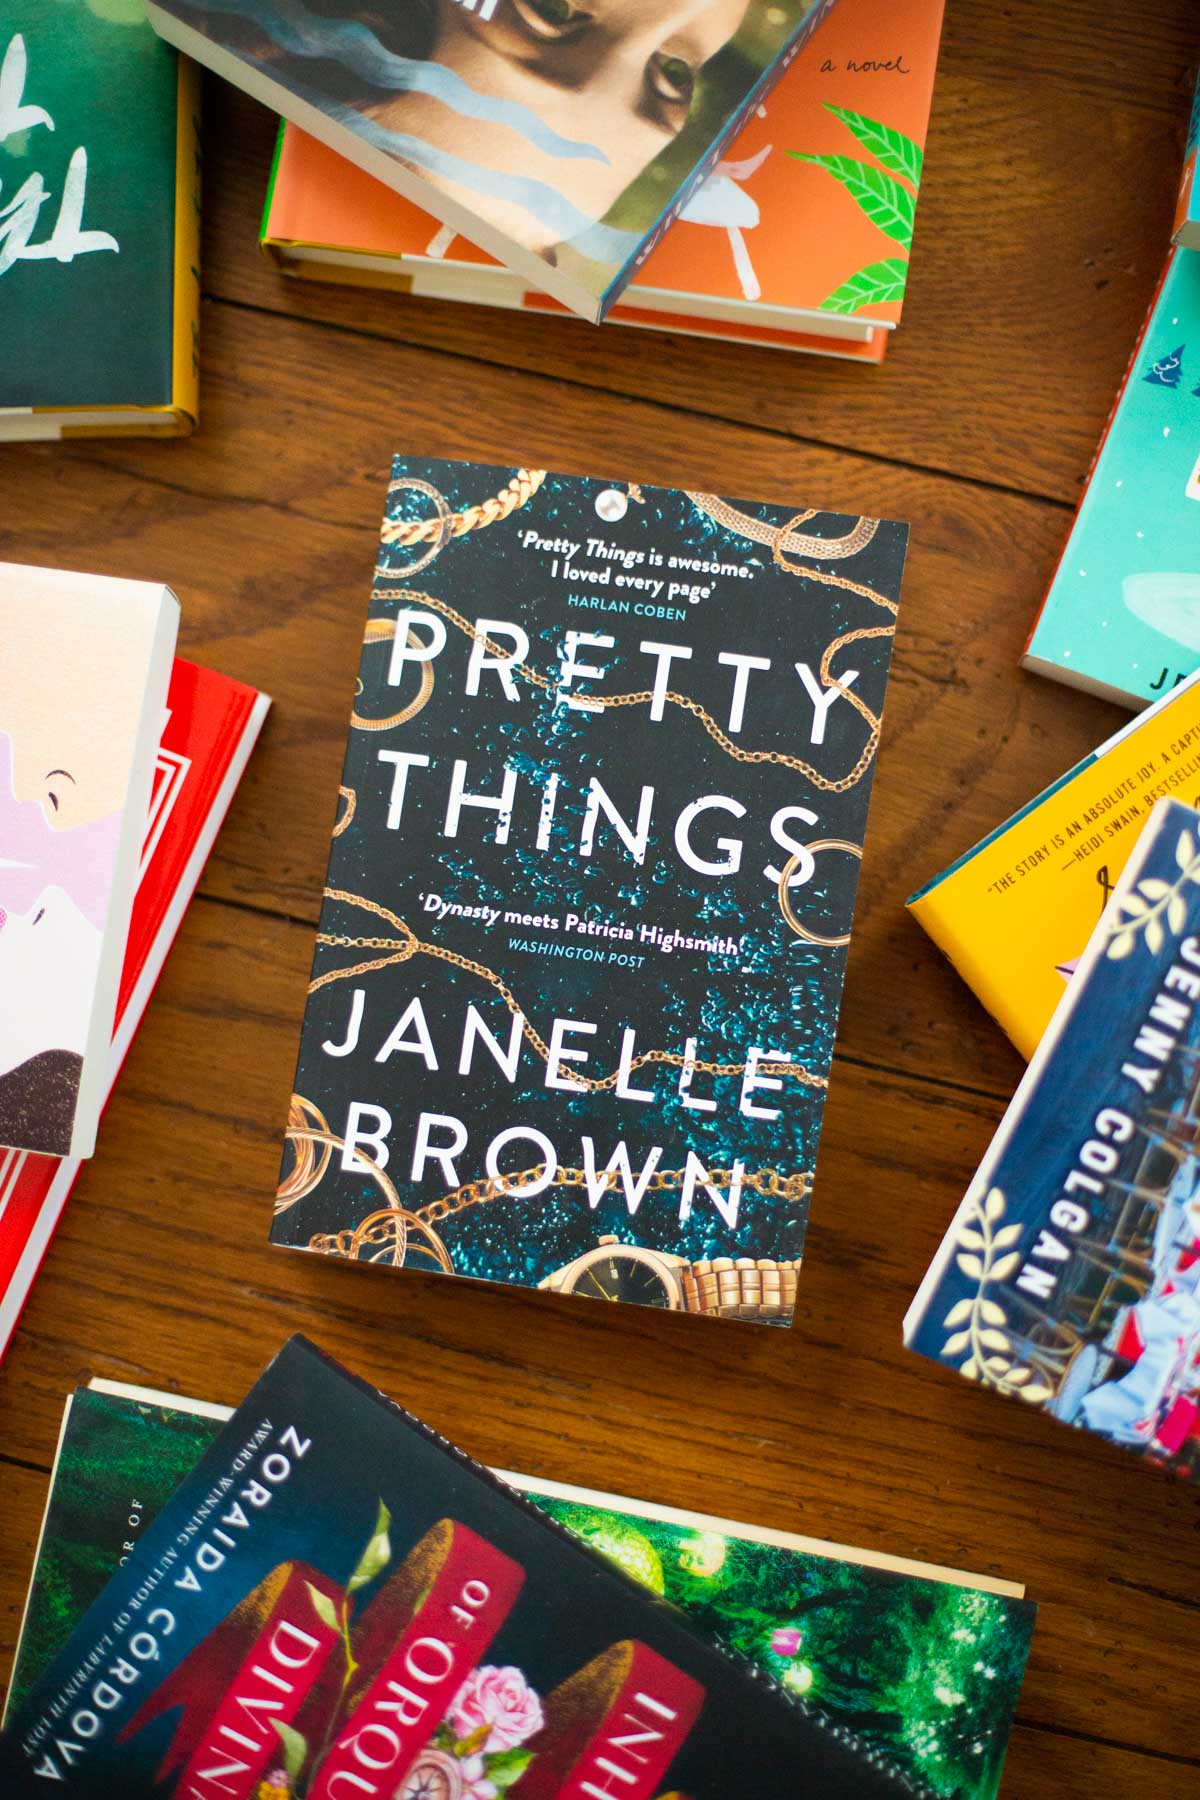 A copy of the book Pretty Things sits on a table.